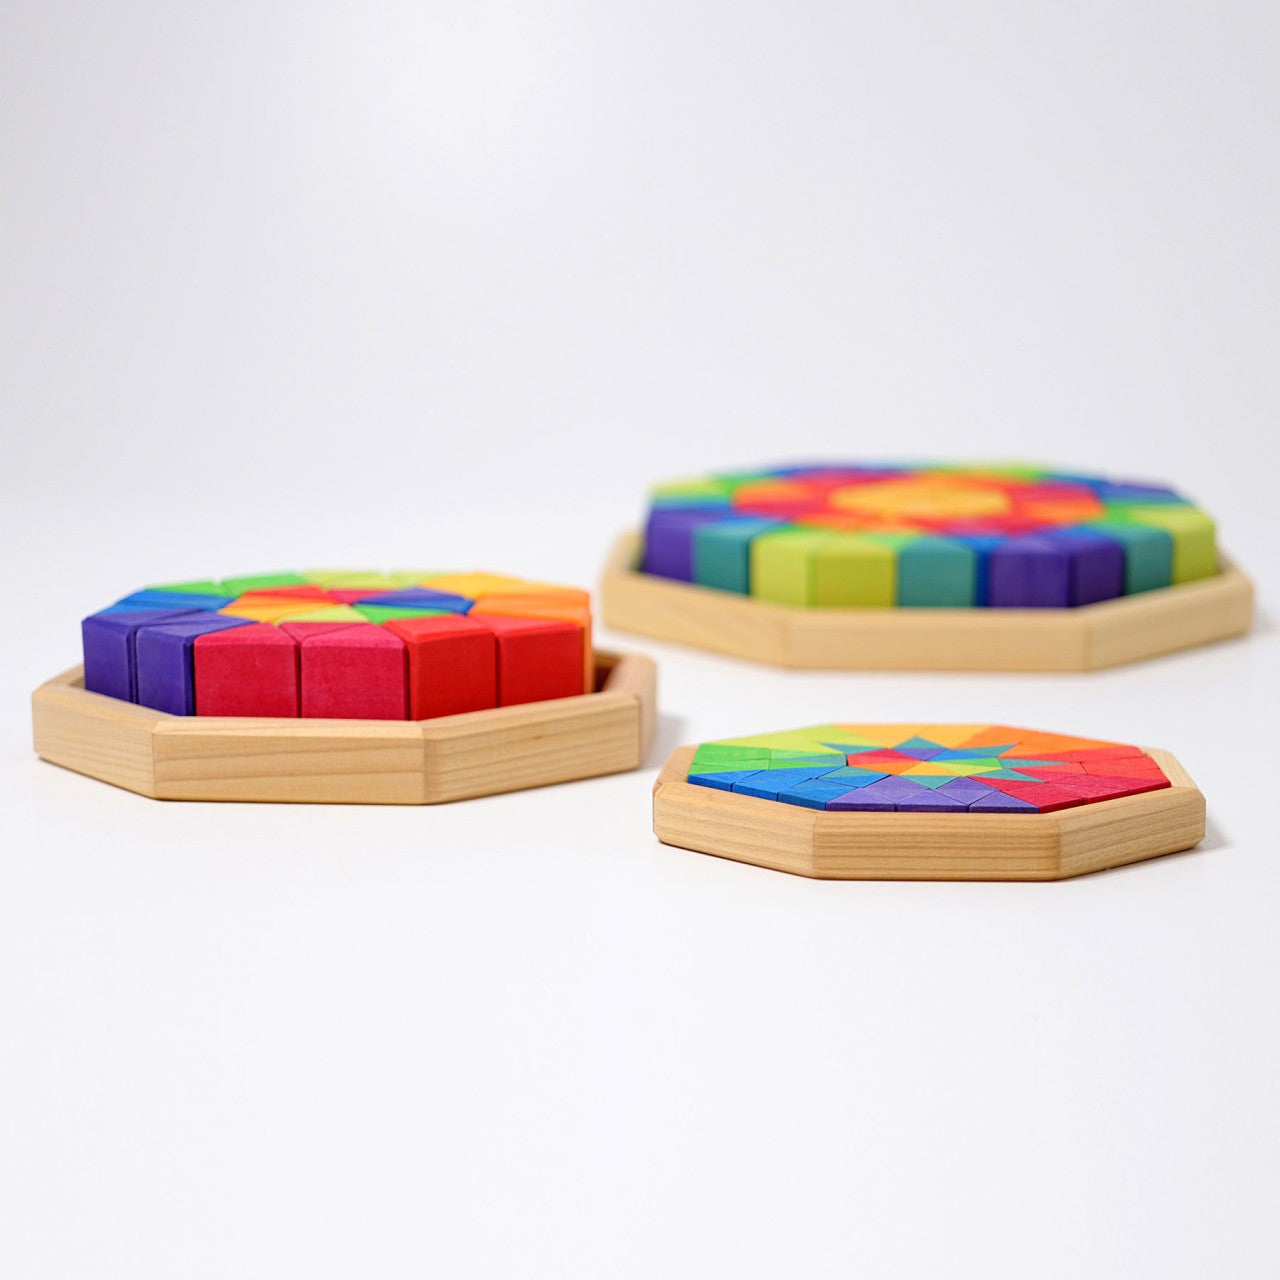 Large Octagon | Wooden Puzzle & Building Set | Open-Ended Play